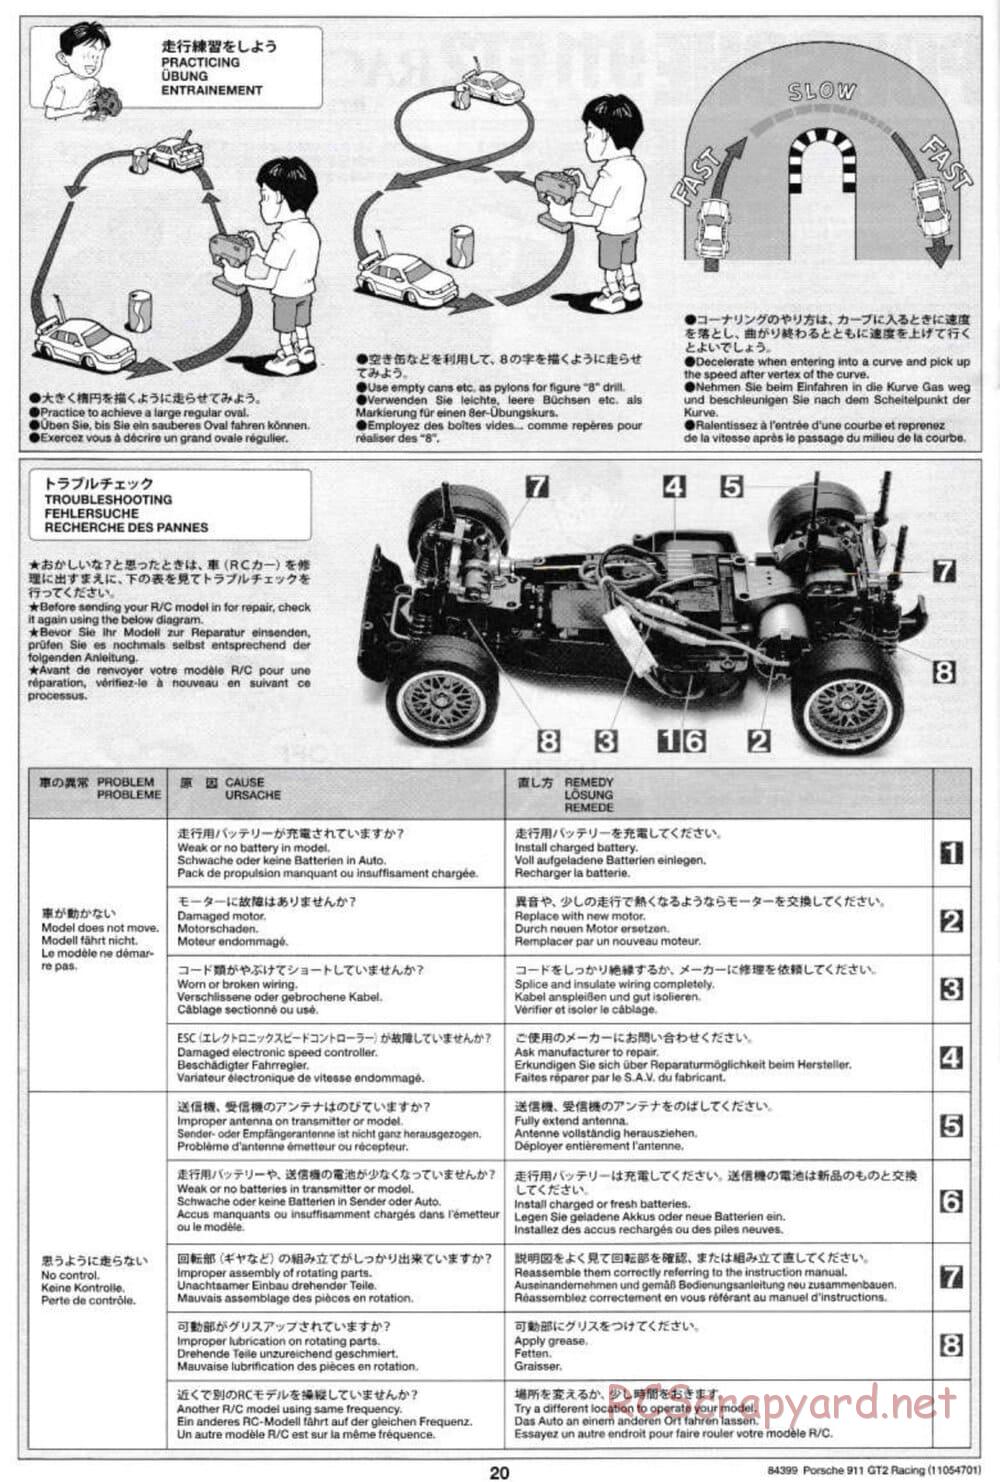 Tamiya - Porsche 911 GT2 Racing - TA02SW Chassis - Manual - Page 20